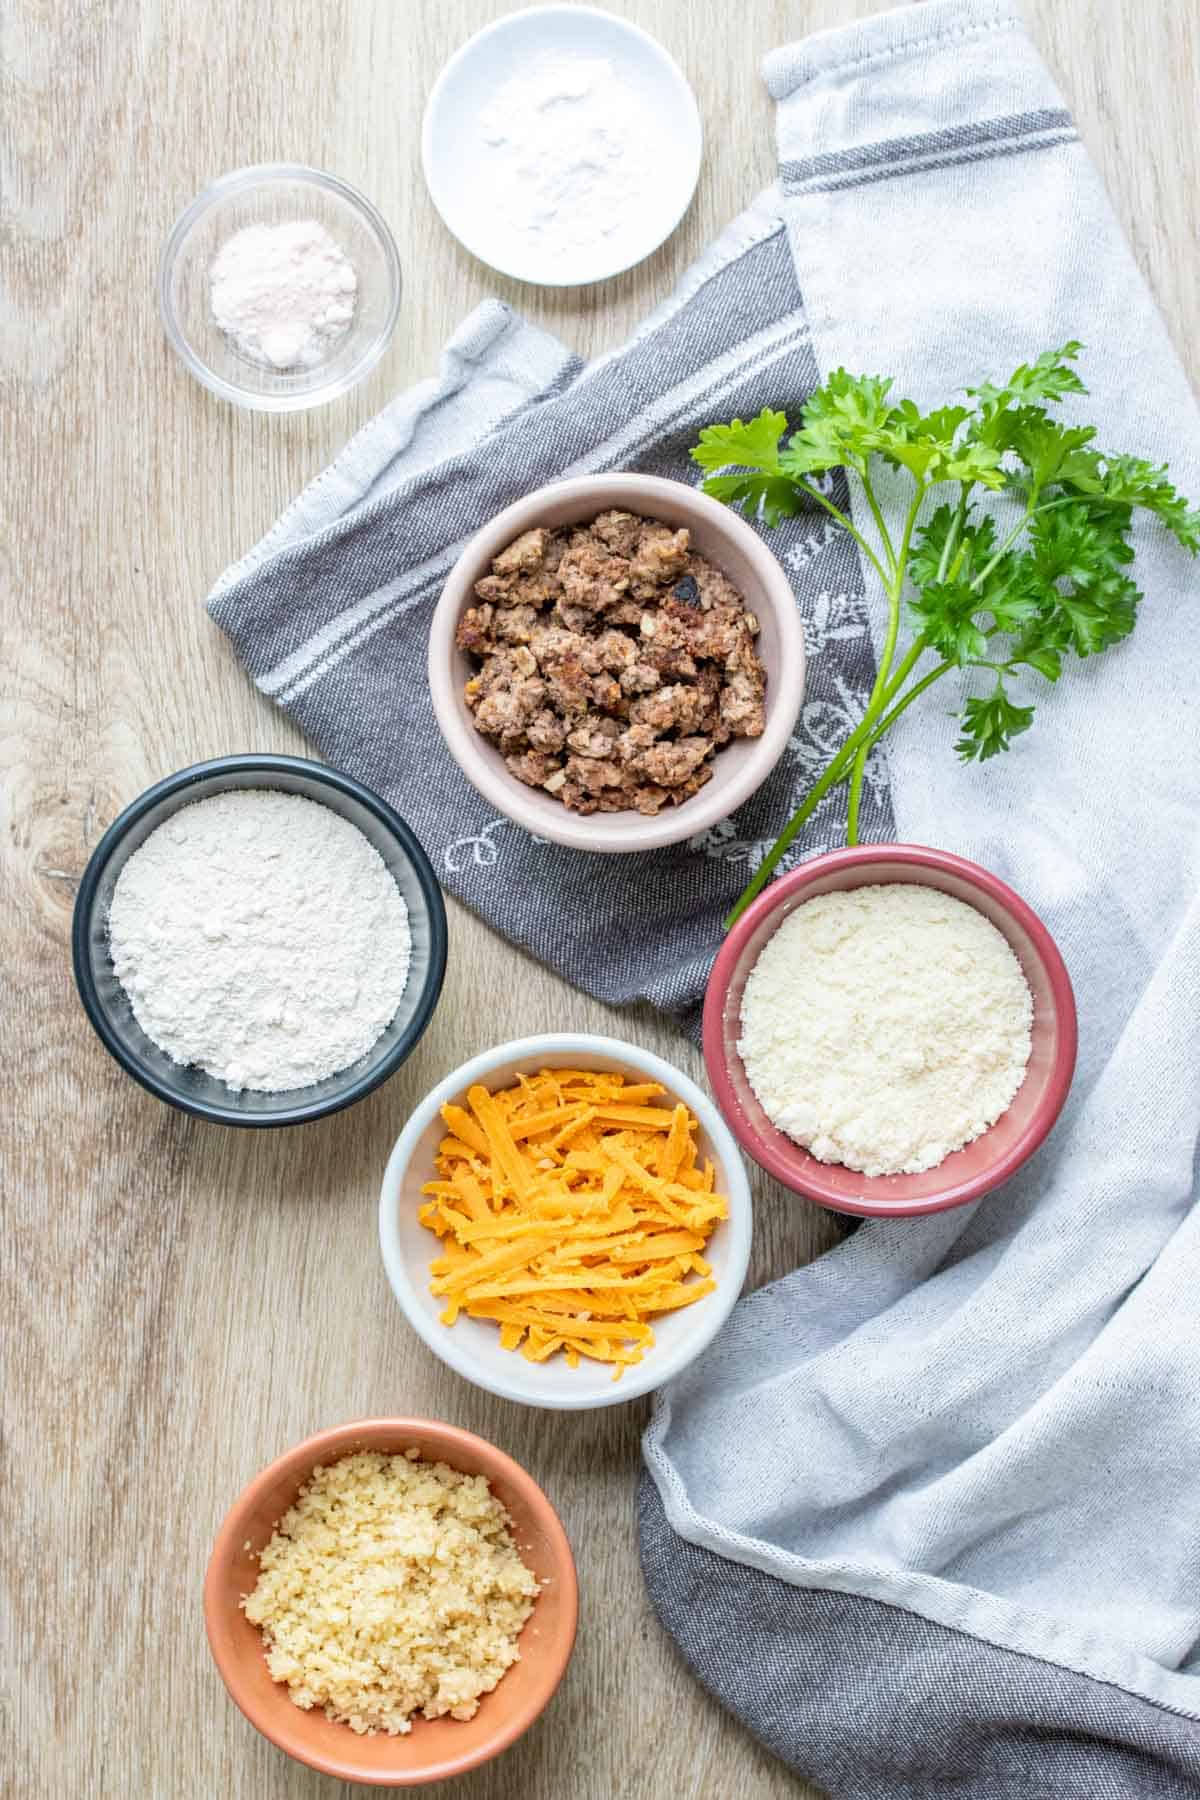 Bowls with flours, cheese, crumbled sausage baking powder and salt on a wooden surface with parsley